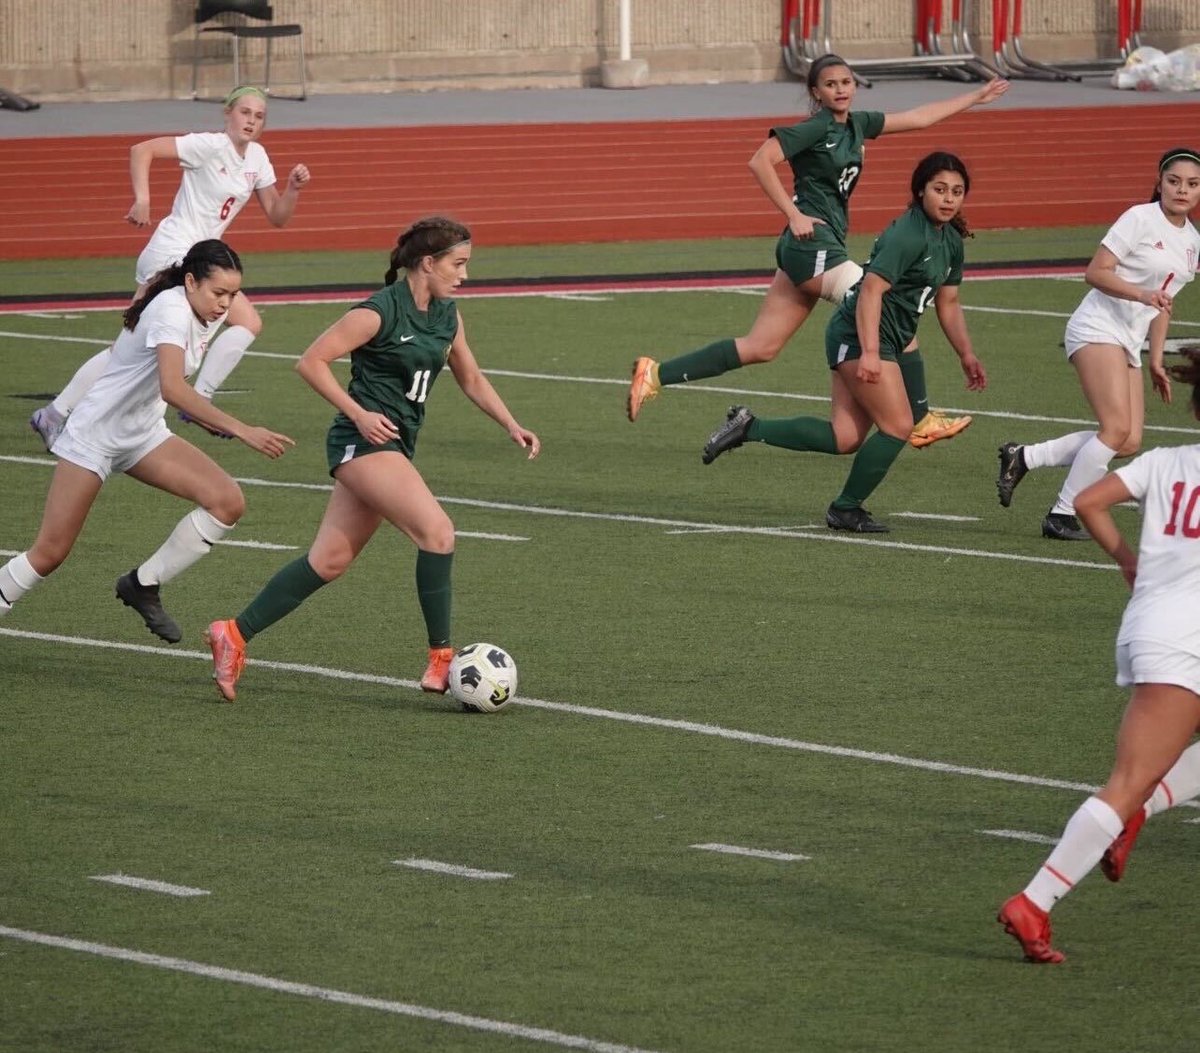 Up next! Week 23 1st Phorm AOW Nominee: Madison Asel, F, Frisco Lebanon Trail Asel was on fire this past week, with a hat trick, scoring 3 goals on the way to a big district 6-1 win.